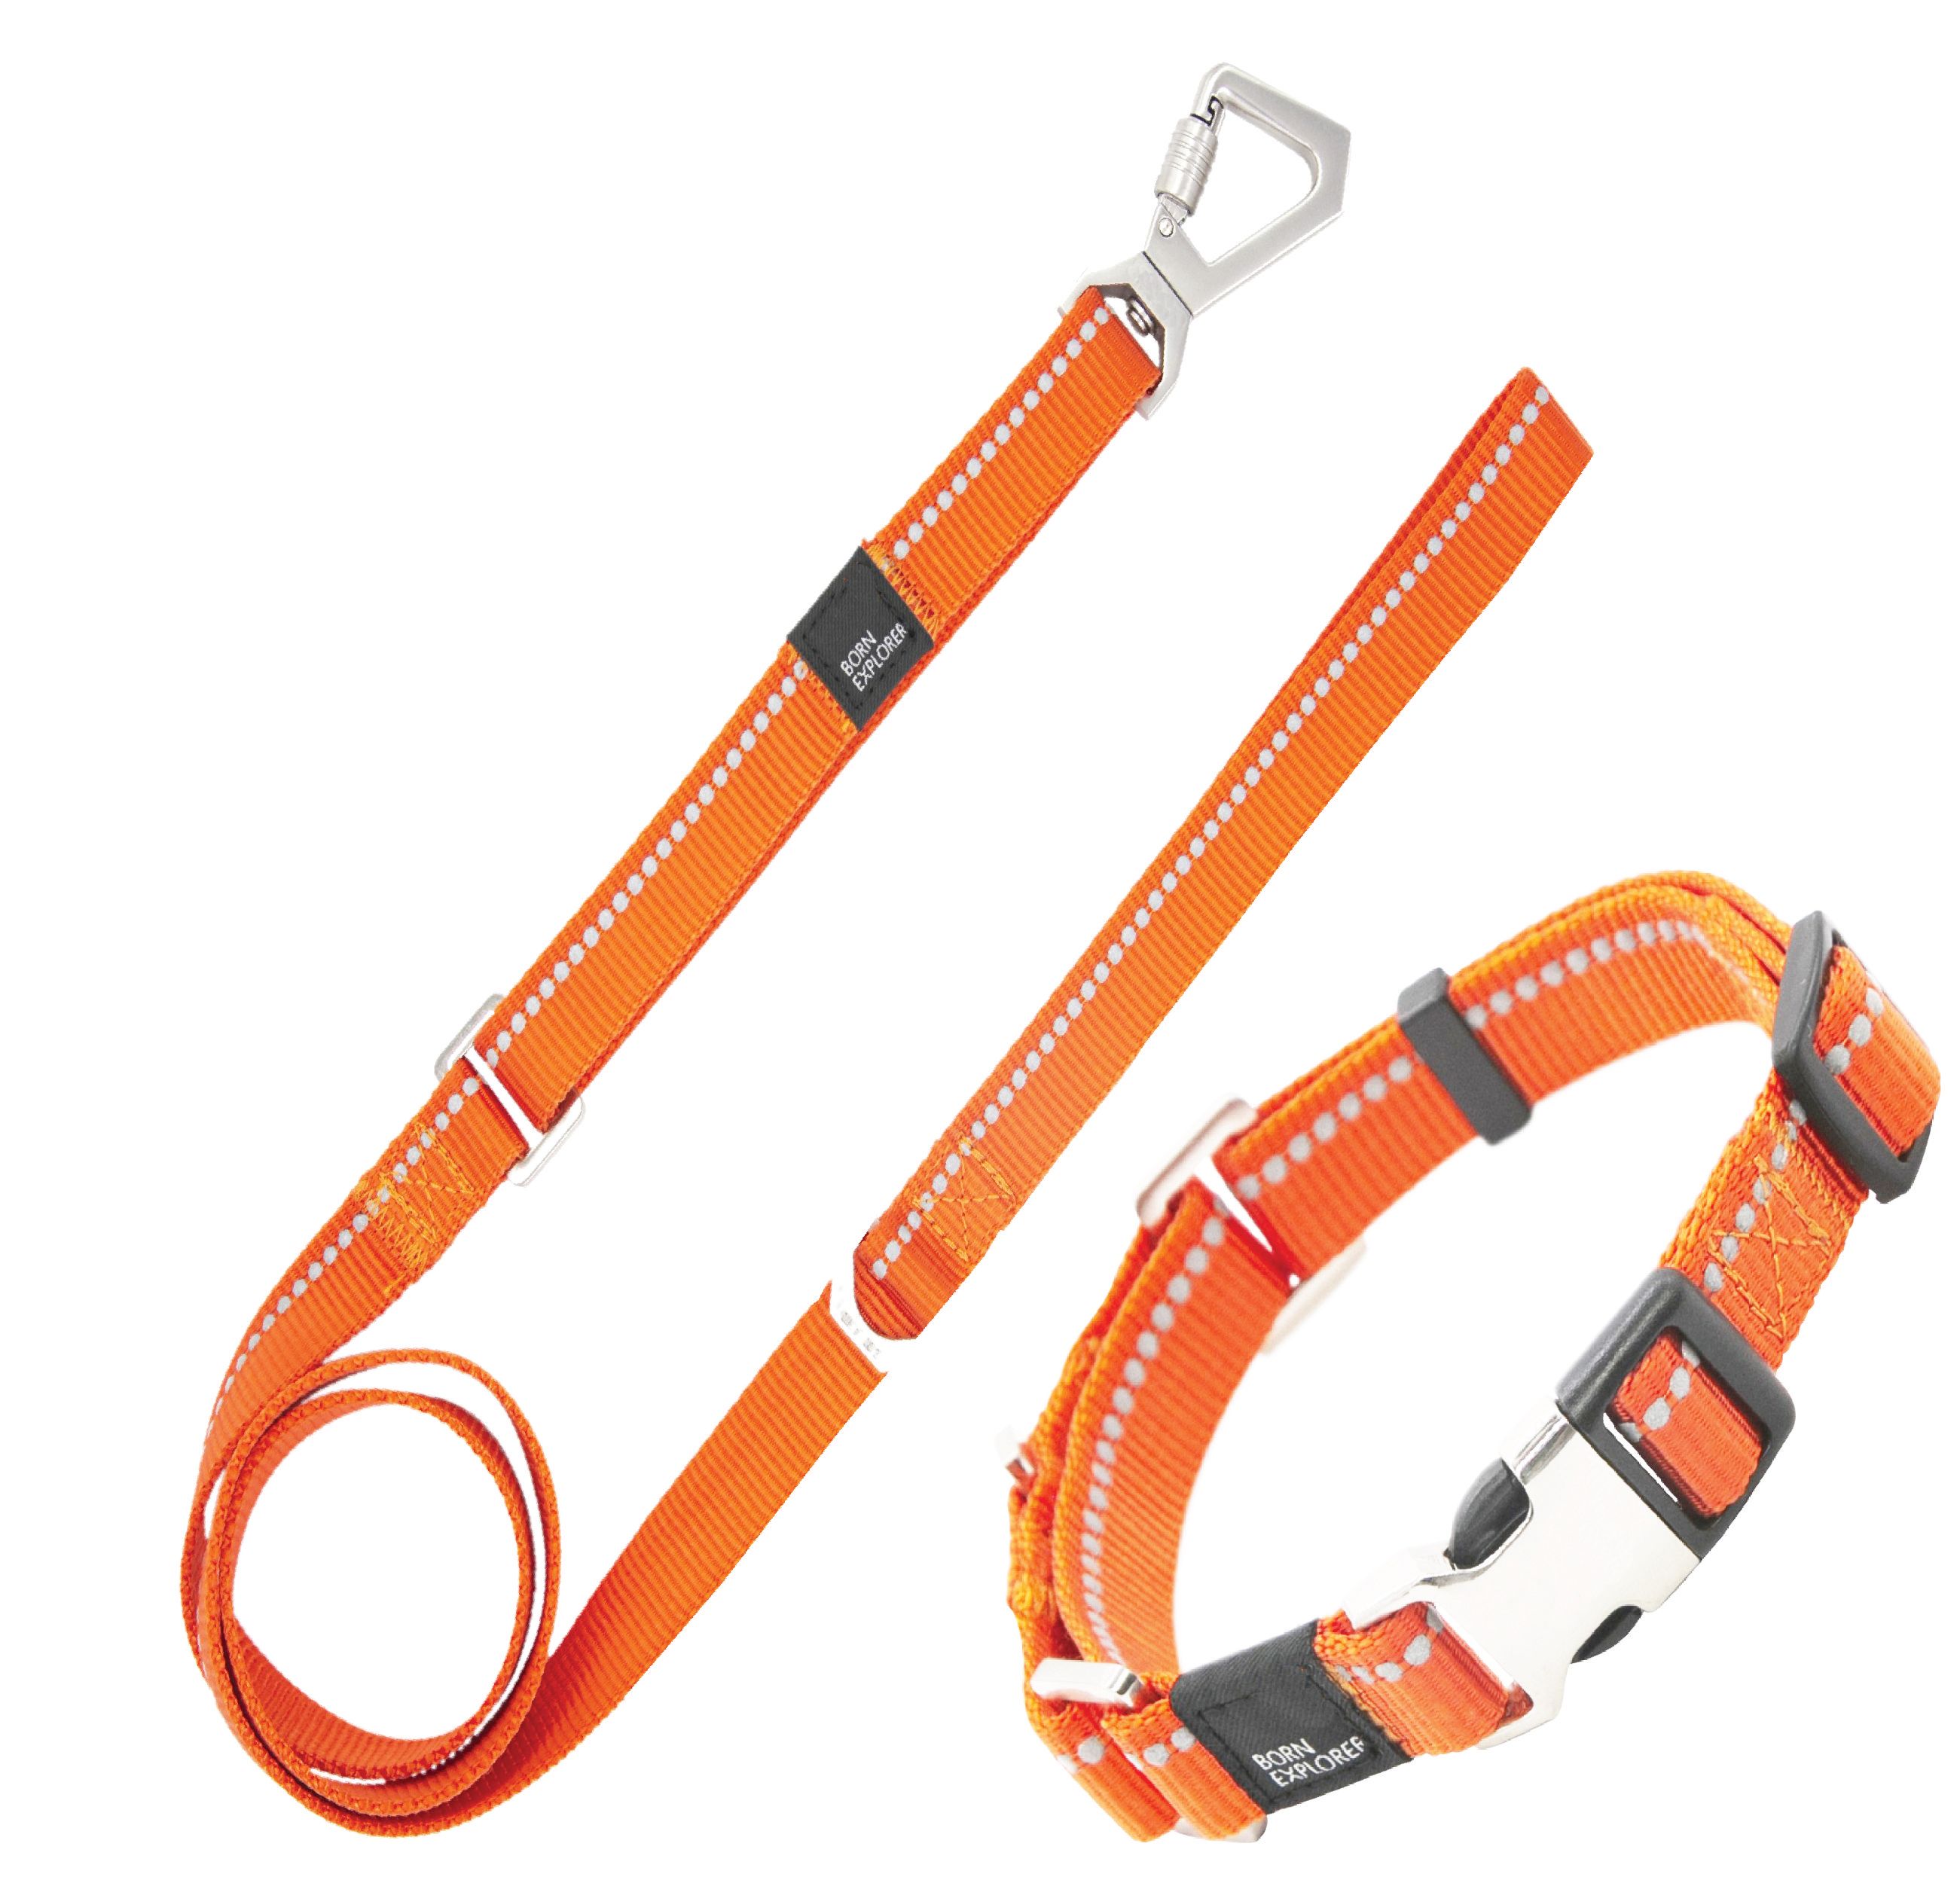 Pet Life ® 'Advent' Outdoor Series 3M Reflective 2-in-1 Durable Martingale Training Dog Leash and Collar Orange Small